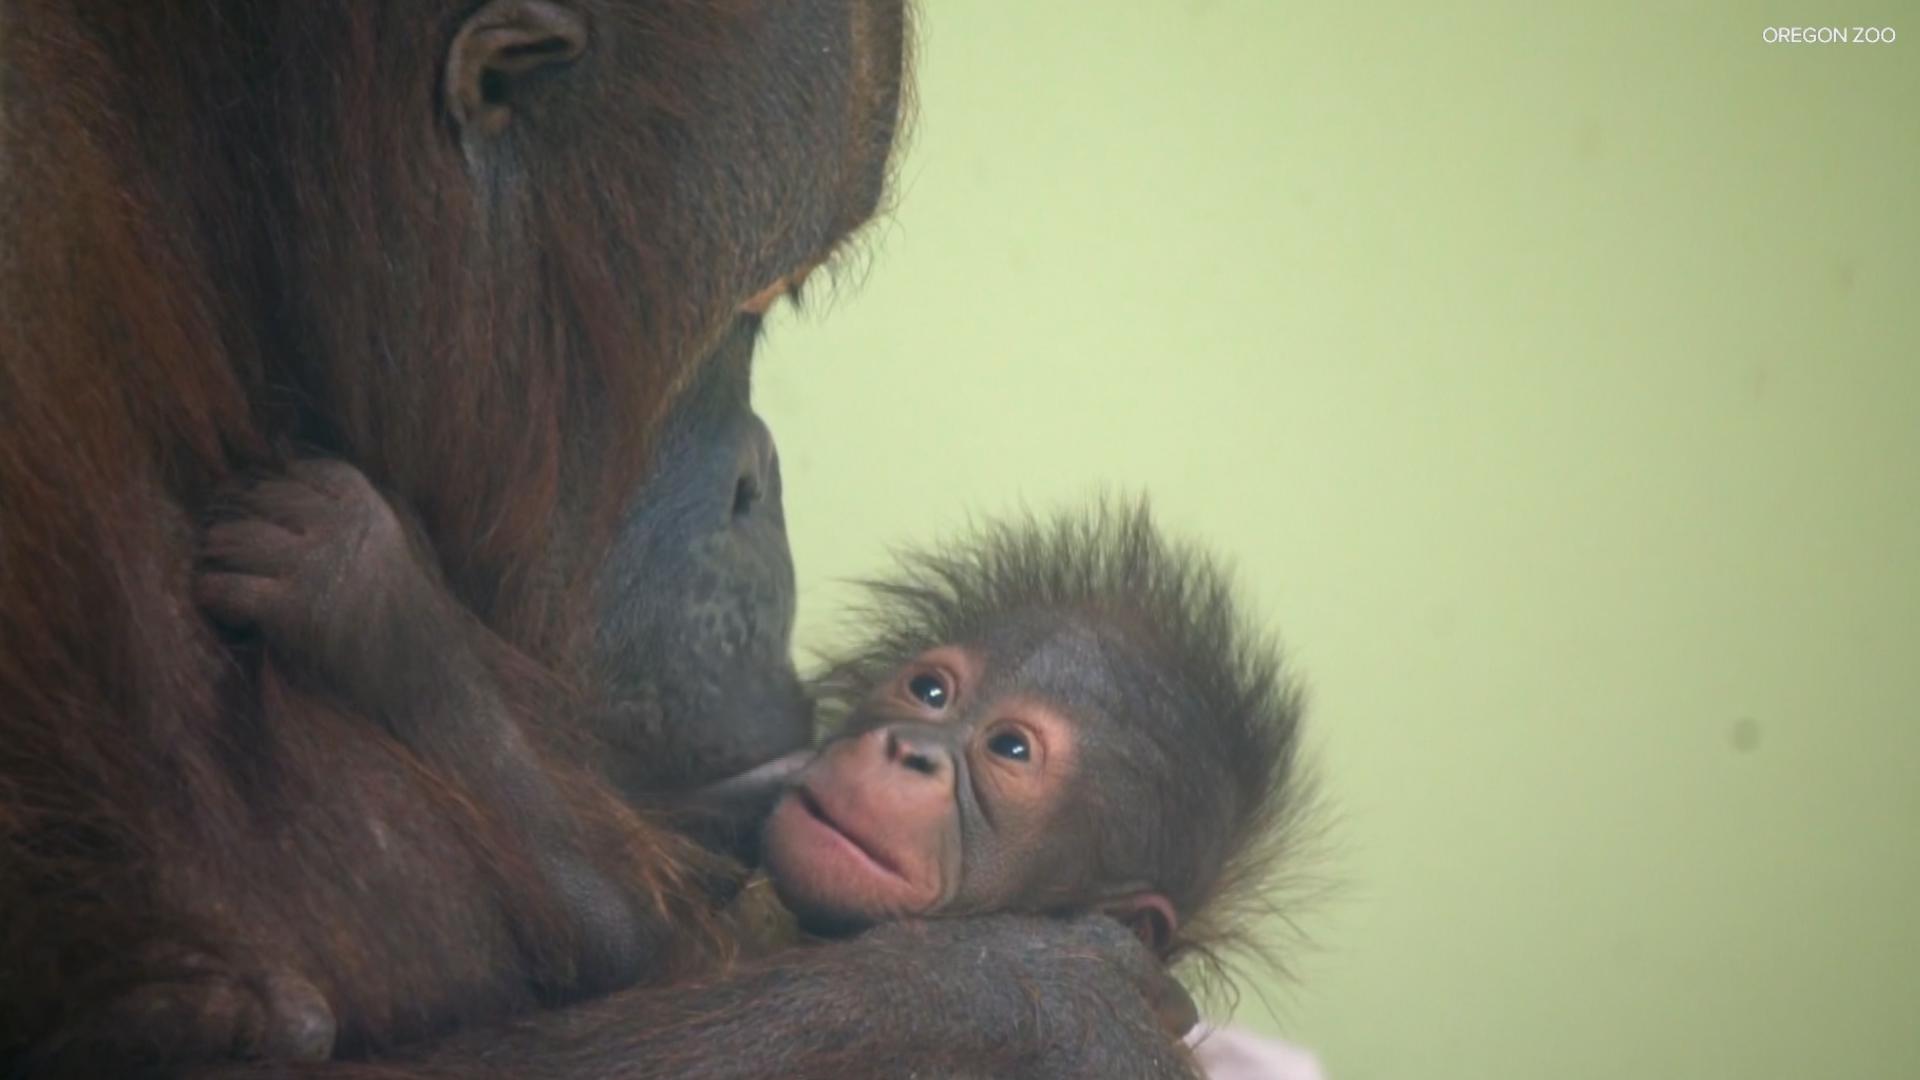 Mother's Day weekend is almost here, so Drew Carney visited orangutan mom Kitra and her 2-year-old baby, Jolene, at the Oregon Zoo.